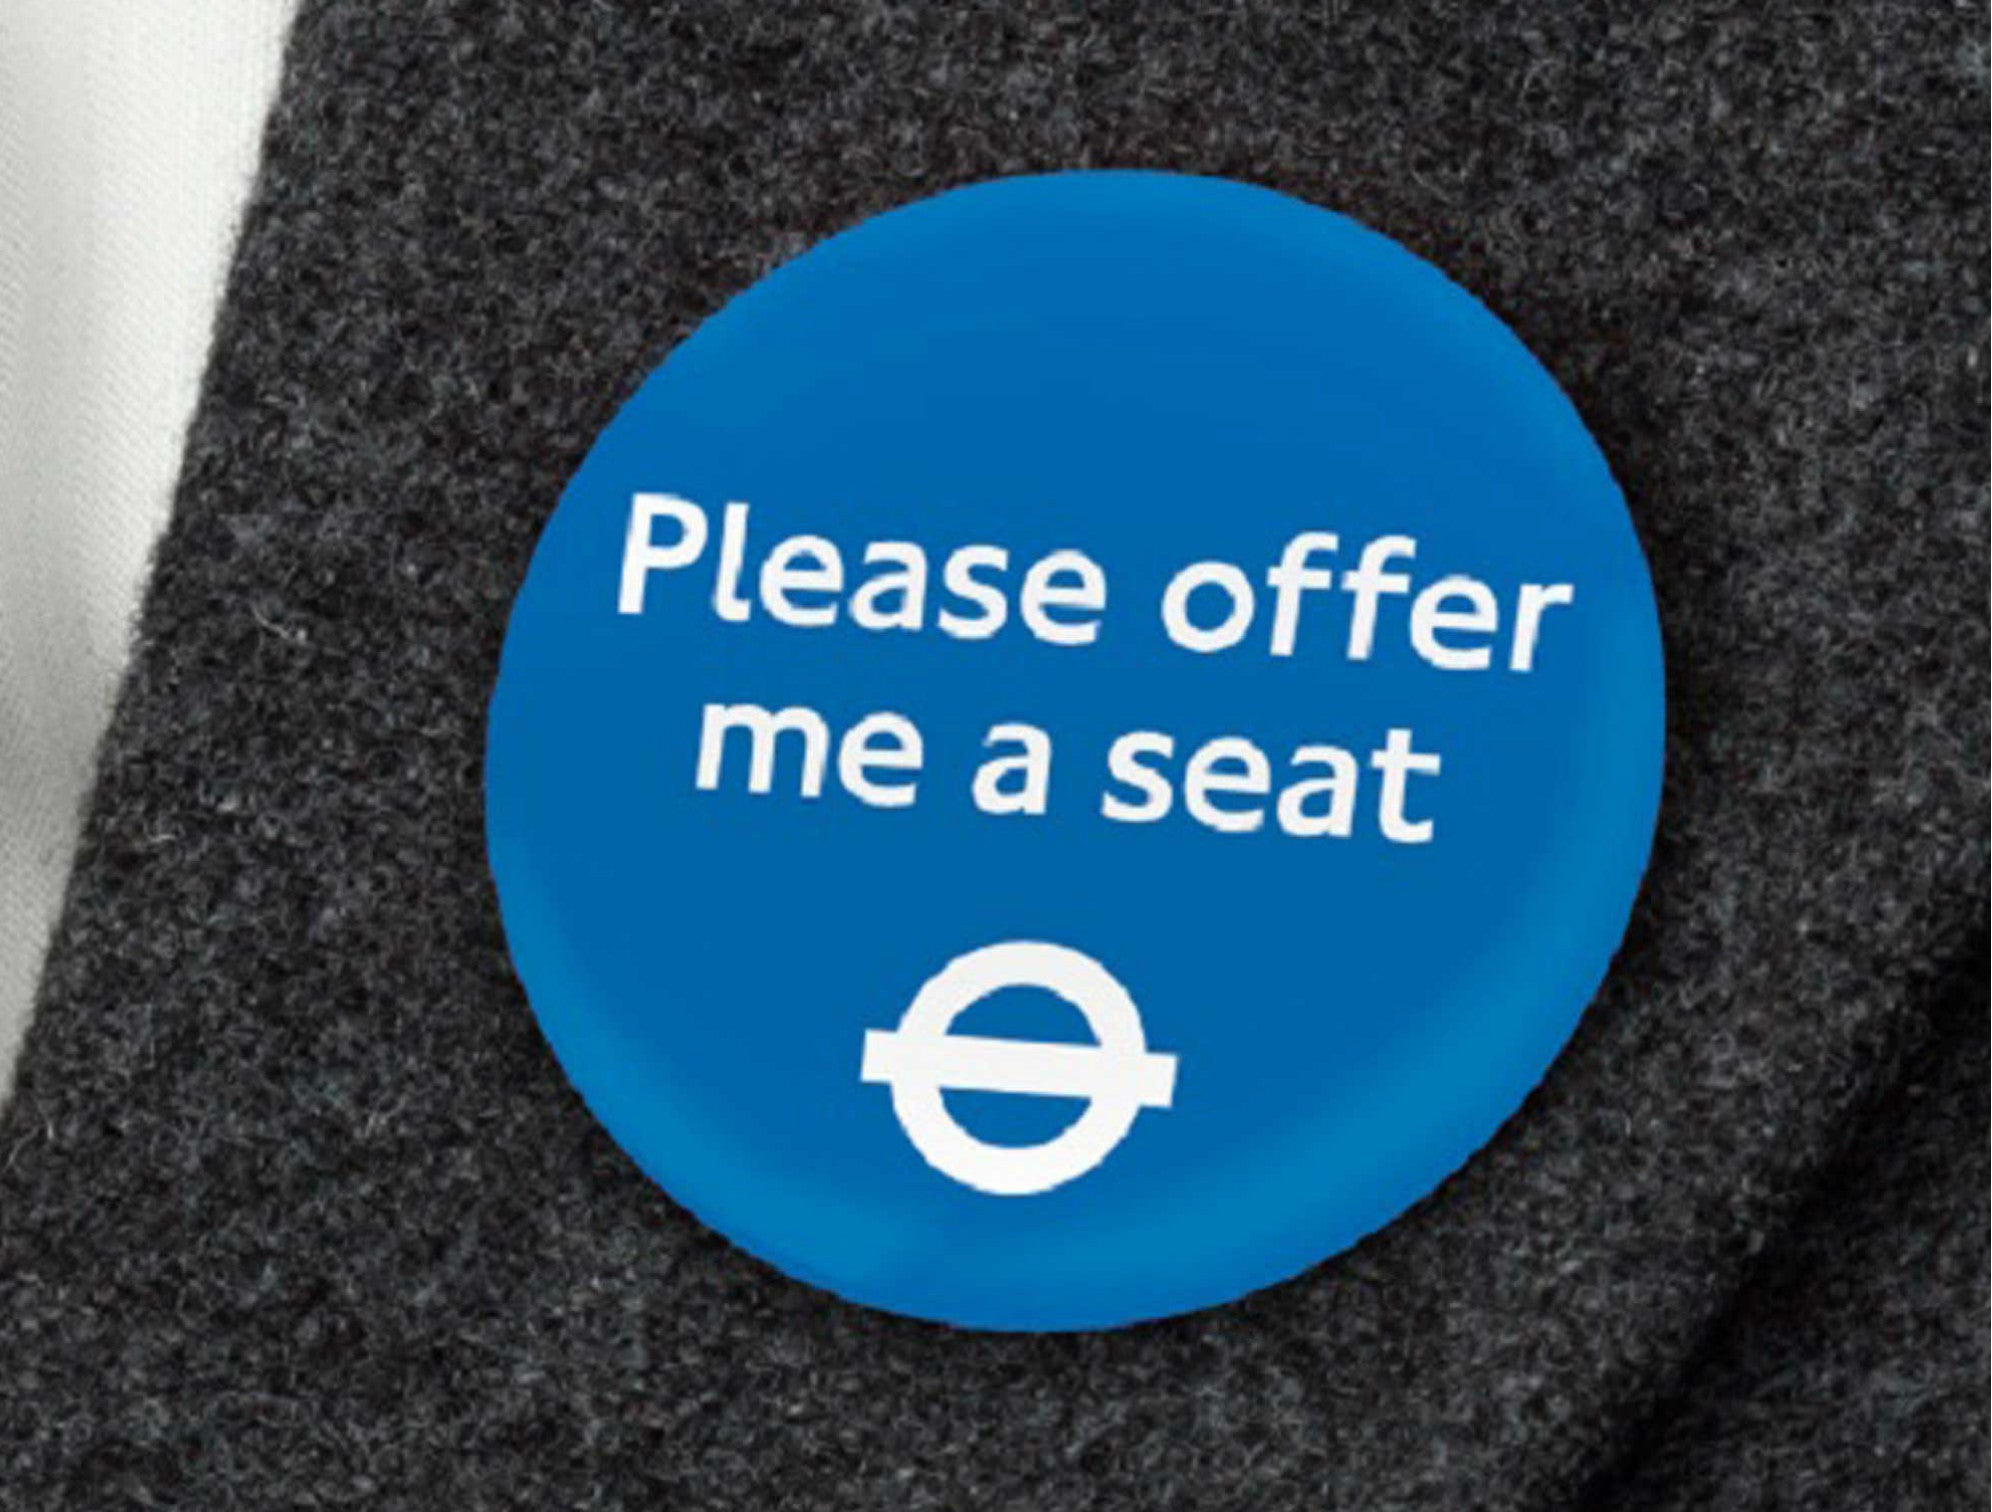 The badge has been created by TFL for passengers with hidden health conditions who need a seat on public transport